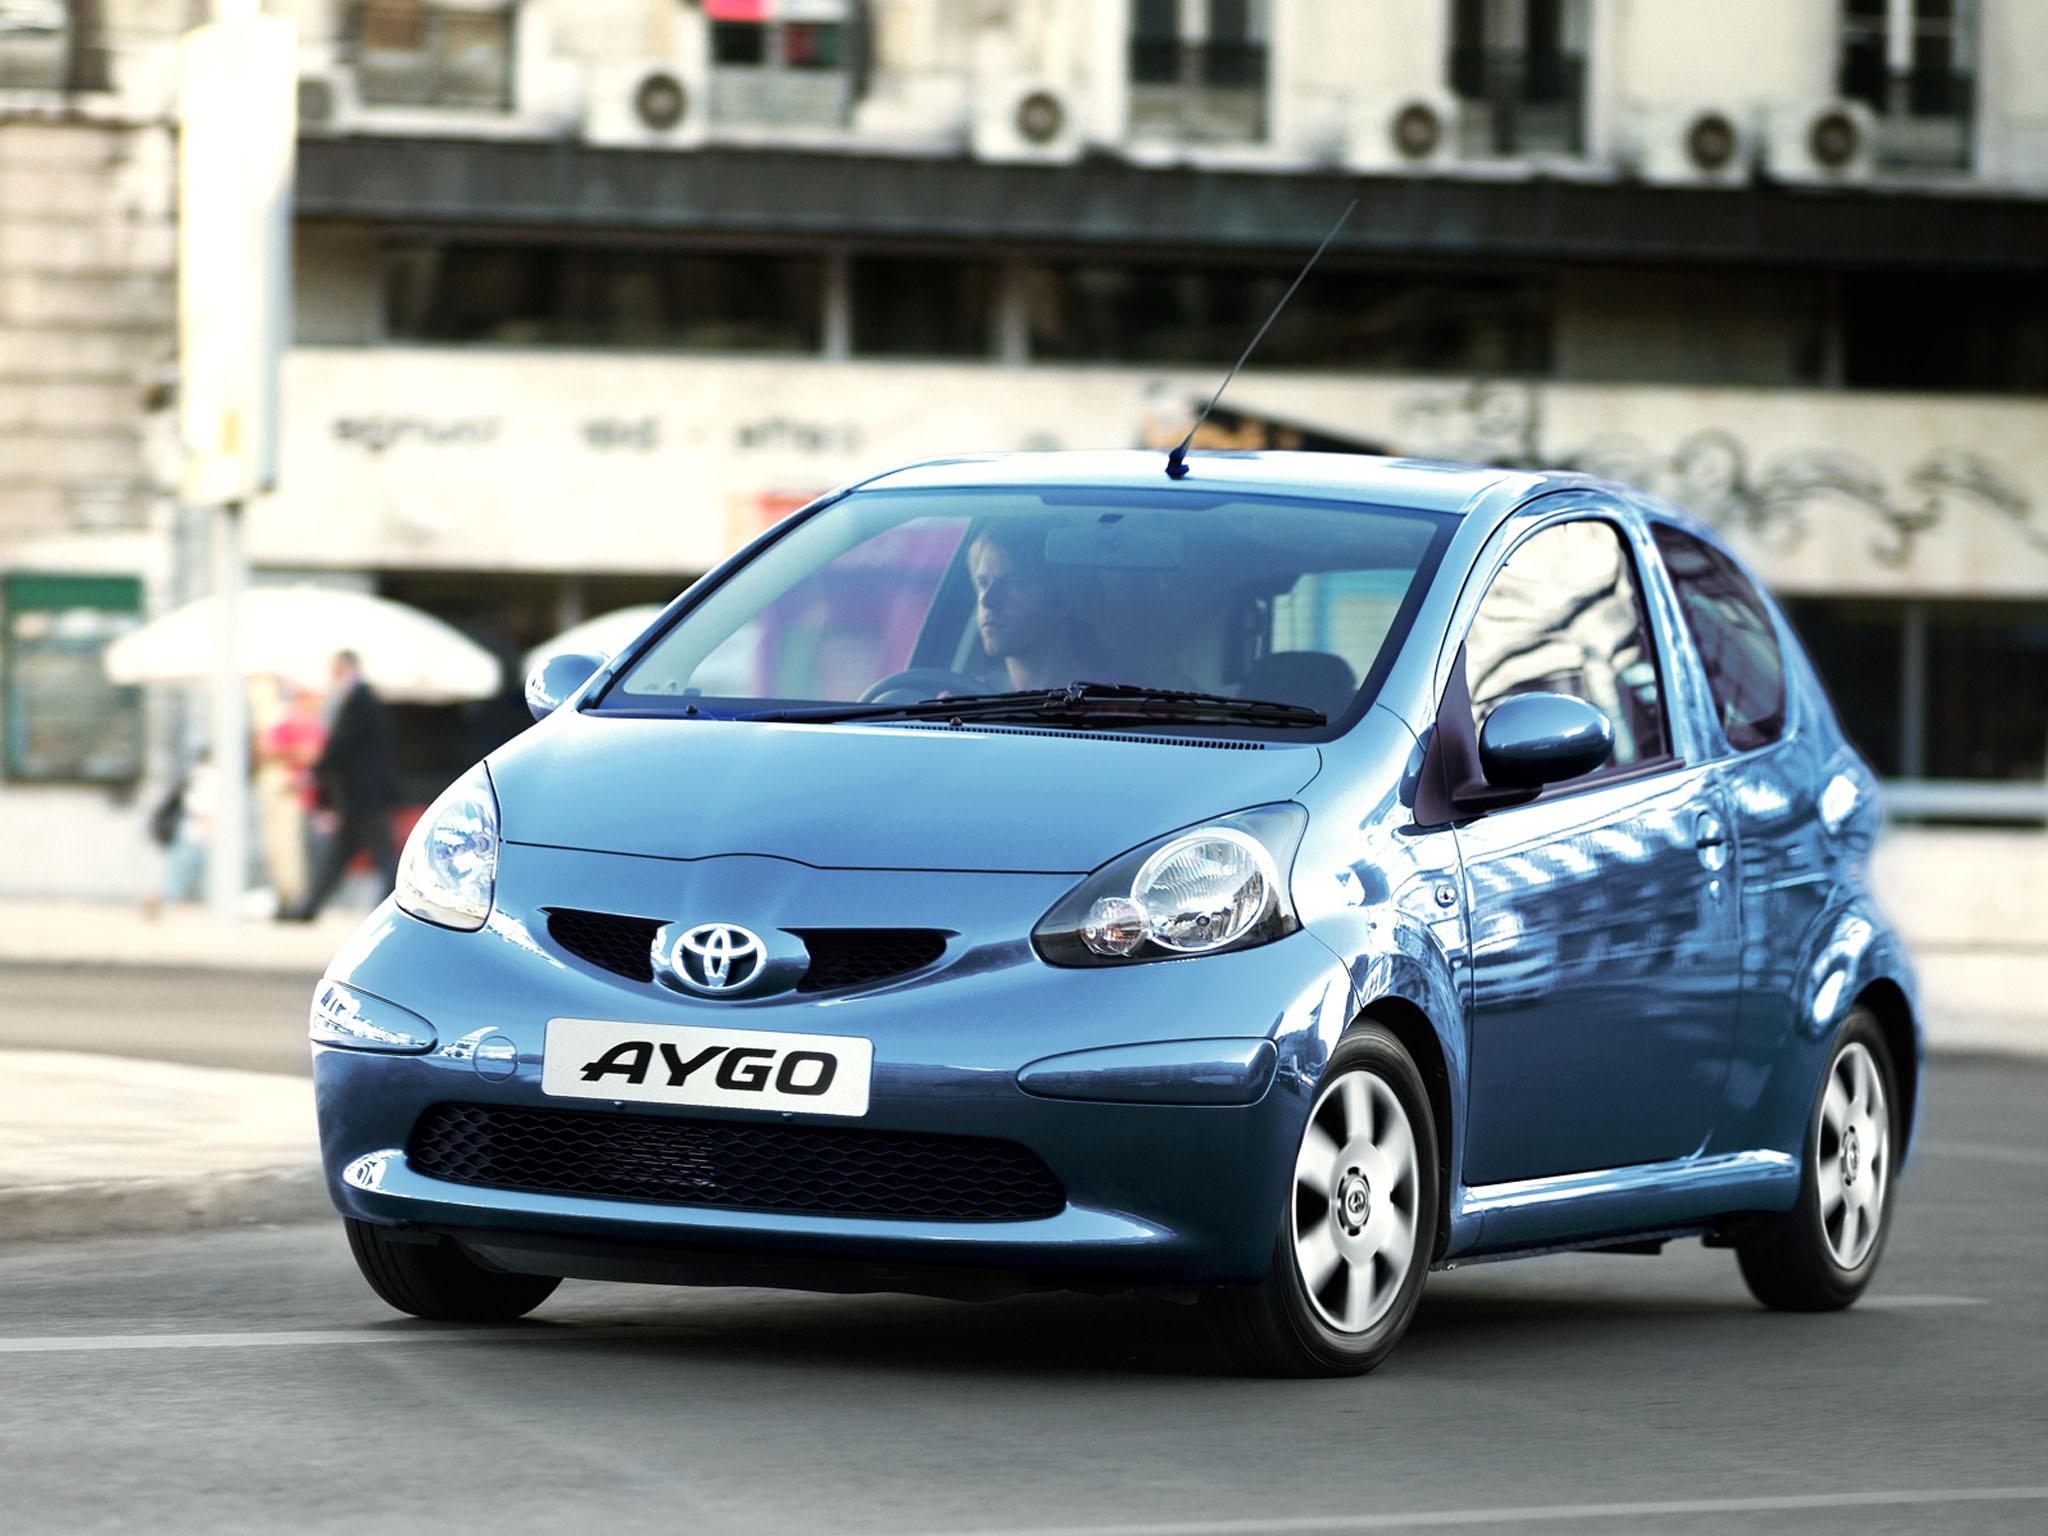 Car choice: Toyota Aygo an automatic choice for a young driver